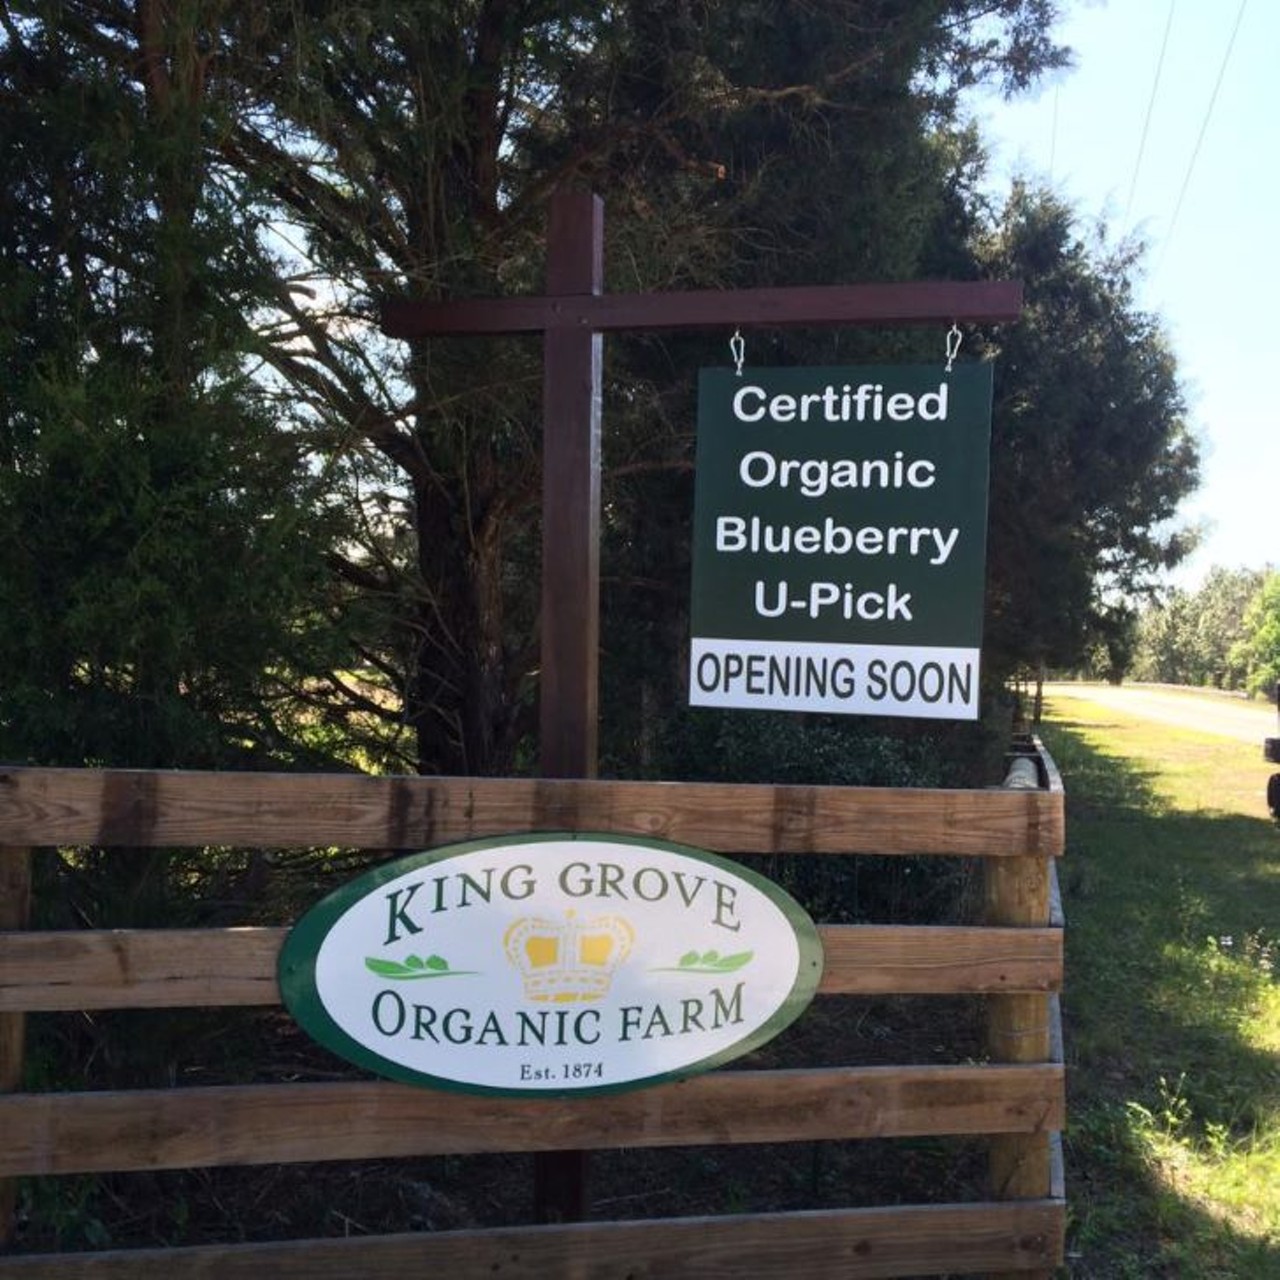 King Grove Organic Farm 
19714 County Road 44A, Eustis
Certified organic, King Grove will reopen for their 2021 season sometime in March, according to their website. Keep an eye open for news and updates there and on their Facebook page.
Photo via King Grove Organic Farm/Facebook